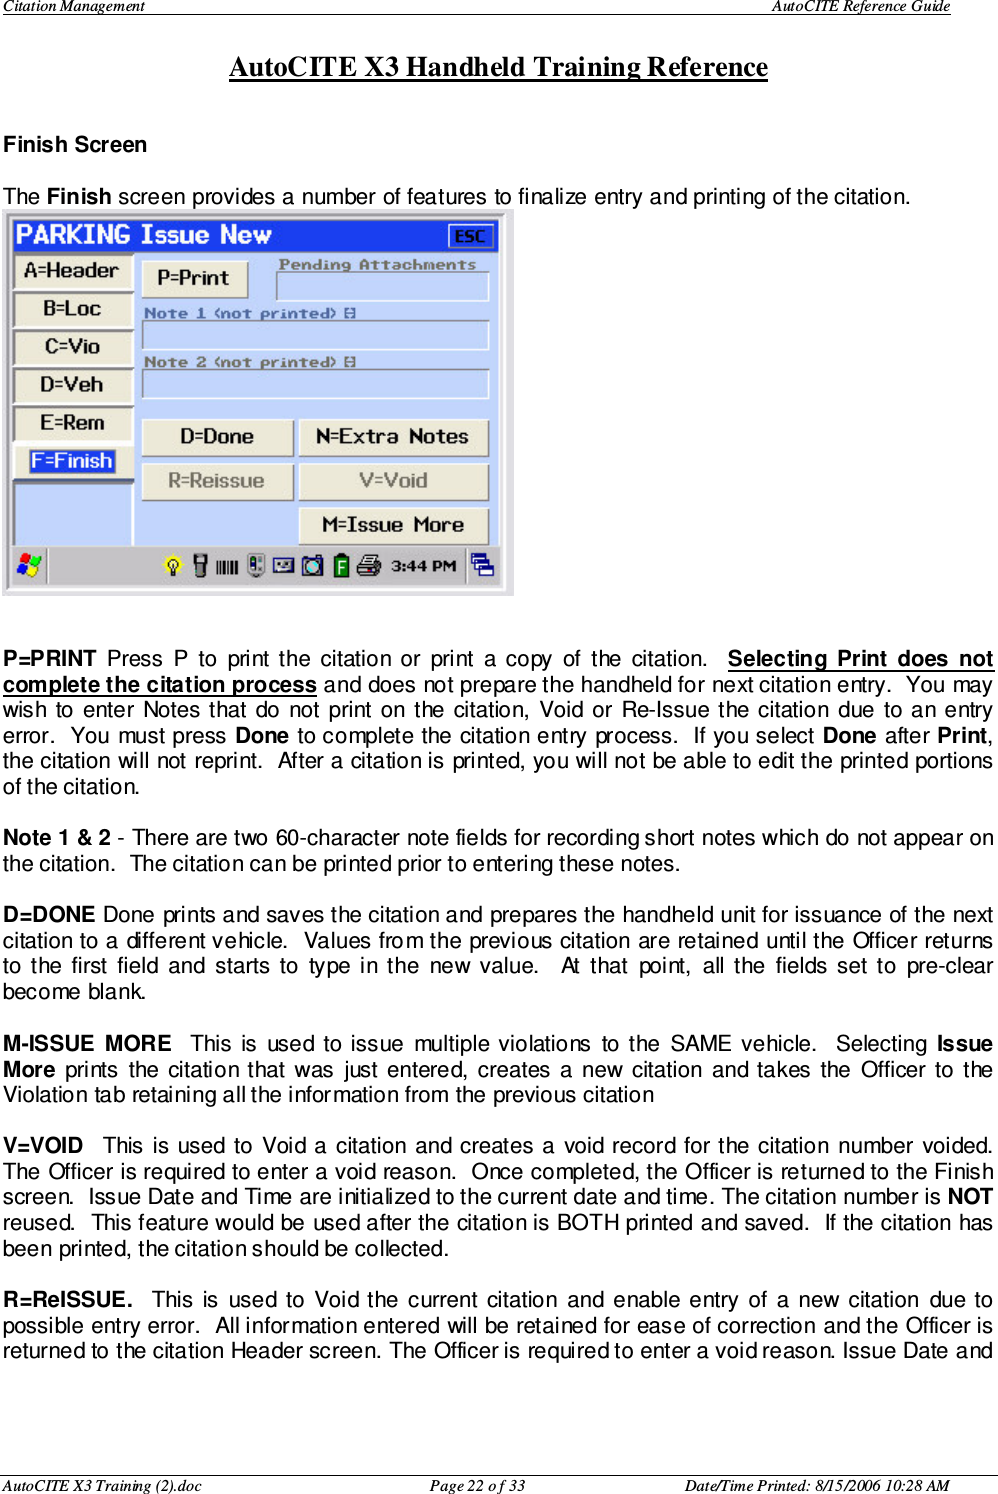 Citation Management    AutoCITE Reference Guide  AutoCITE X3 Handheld Training Reference AutoCITE X3 Training (2).doc  Page 22 o f 33  Date/Time Printed: 8/15/2006 10:28 AM Finish Screen  The Finish screen provides a number of features to finalize entry and printing of the citation.    P=PRINT  Press  P  to  print  the  citation  or  print  a  copy  of  the  citation.    Selecting  Print  does  not complete the citation process and does not prepare the handheld for next citation entry.  You may wish  to  enter  Notes that  do  not  print  on  the  citation,  Void  or  Re-Issue the citation  due  to  an  entry error.  You  must press Done to complete the citation entry process.  If you select Done after Print, the citation will not reprint.  After a citation is printed, you will not be able to edit the printed portions of the citation.  Note 1 &amp; 2 - There are two 60-character note fields for recording short notes which do not appear on the citation.  The citation can be printed prior to entering these notes.  D=DONE Done prints and saves the citation and prepares the handheld unit for issuance of the next citation to a different vehicle.  Values from the previous citation are retained until the Officer returns to  the  first  field  and  starts  to  type  in  the  new  value.    At  that  point,  all  the  fields  set  to  pre-clear become blank.  M-ISSUE  MORE    This  is  used  to issue  multiple violations  to  the  SAME  vehicle.   Selecting  Issue More  prints  the  citation that  was  just  entered,  creates  a  new  citation  and takes  the  Officer  to  the Violation tab retaining all the information from the previous citation  V=VOID    This  is  used  to  Void a  citation  and creates  a  void record for the citation  number  voided.  The Officer is required to enter a void reason.  Once completed, the Officer is returned to the Finish screen.  Issue Date and Time are initialized to the current date and time. The citation number is NOT reused.  This feature would be used after the citation is BOTH printed and saved.  If the citation has been printed, the citation should be collected.    R=ReISSUE.    This  is  used  to  Void  the  current  citation  and enable  entry  of  a  new  citation  due to possible entry error.  All information entered will be retained for ease of correction and the Officer is returned to the citation Header screen. The Officer is required to enter a void reason. Issue Date and    